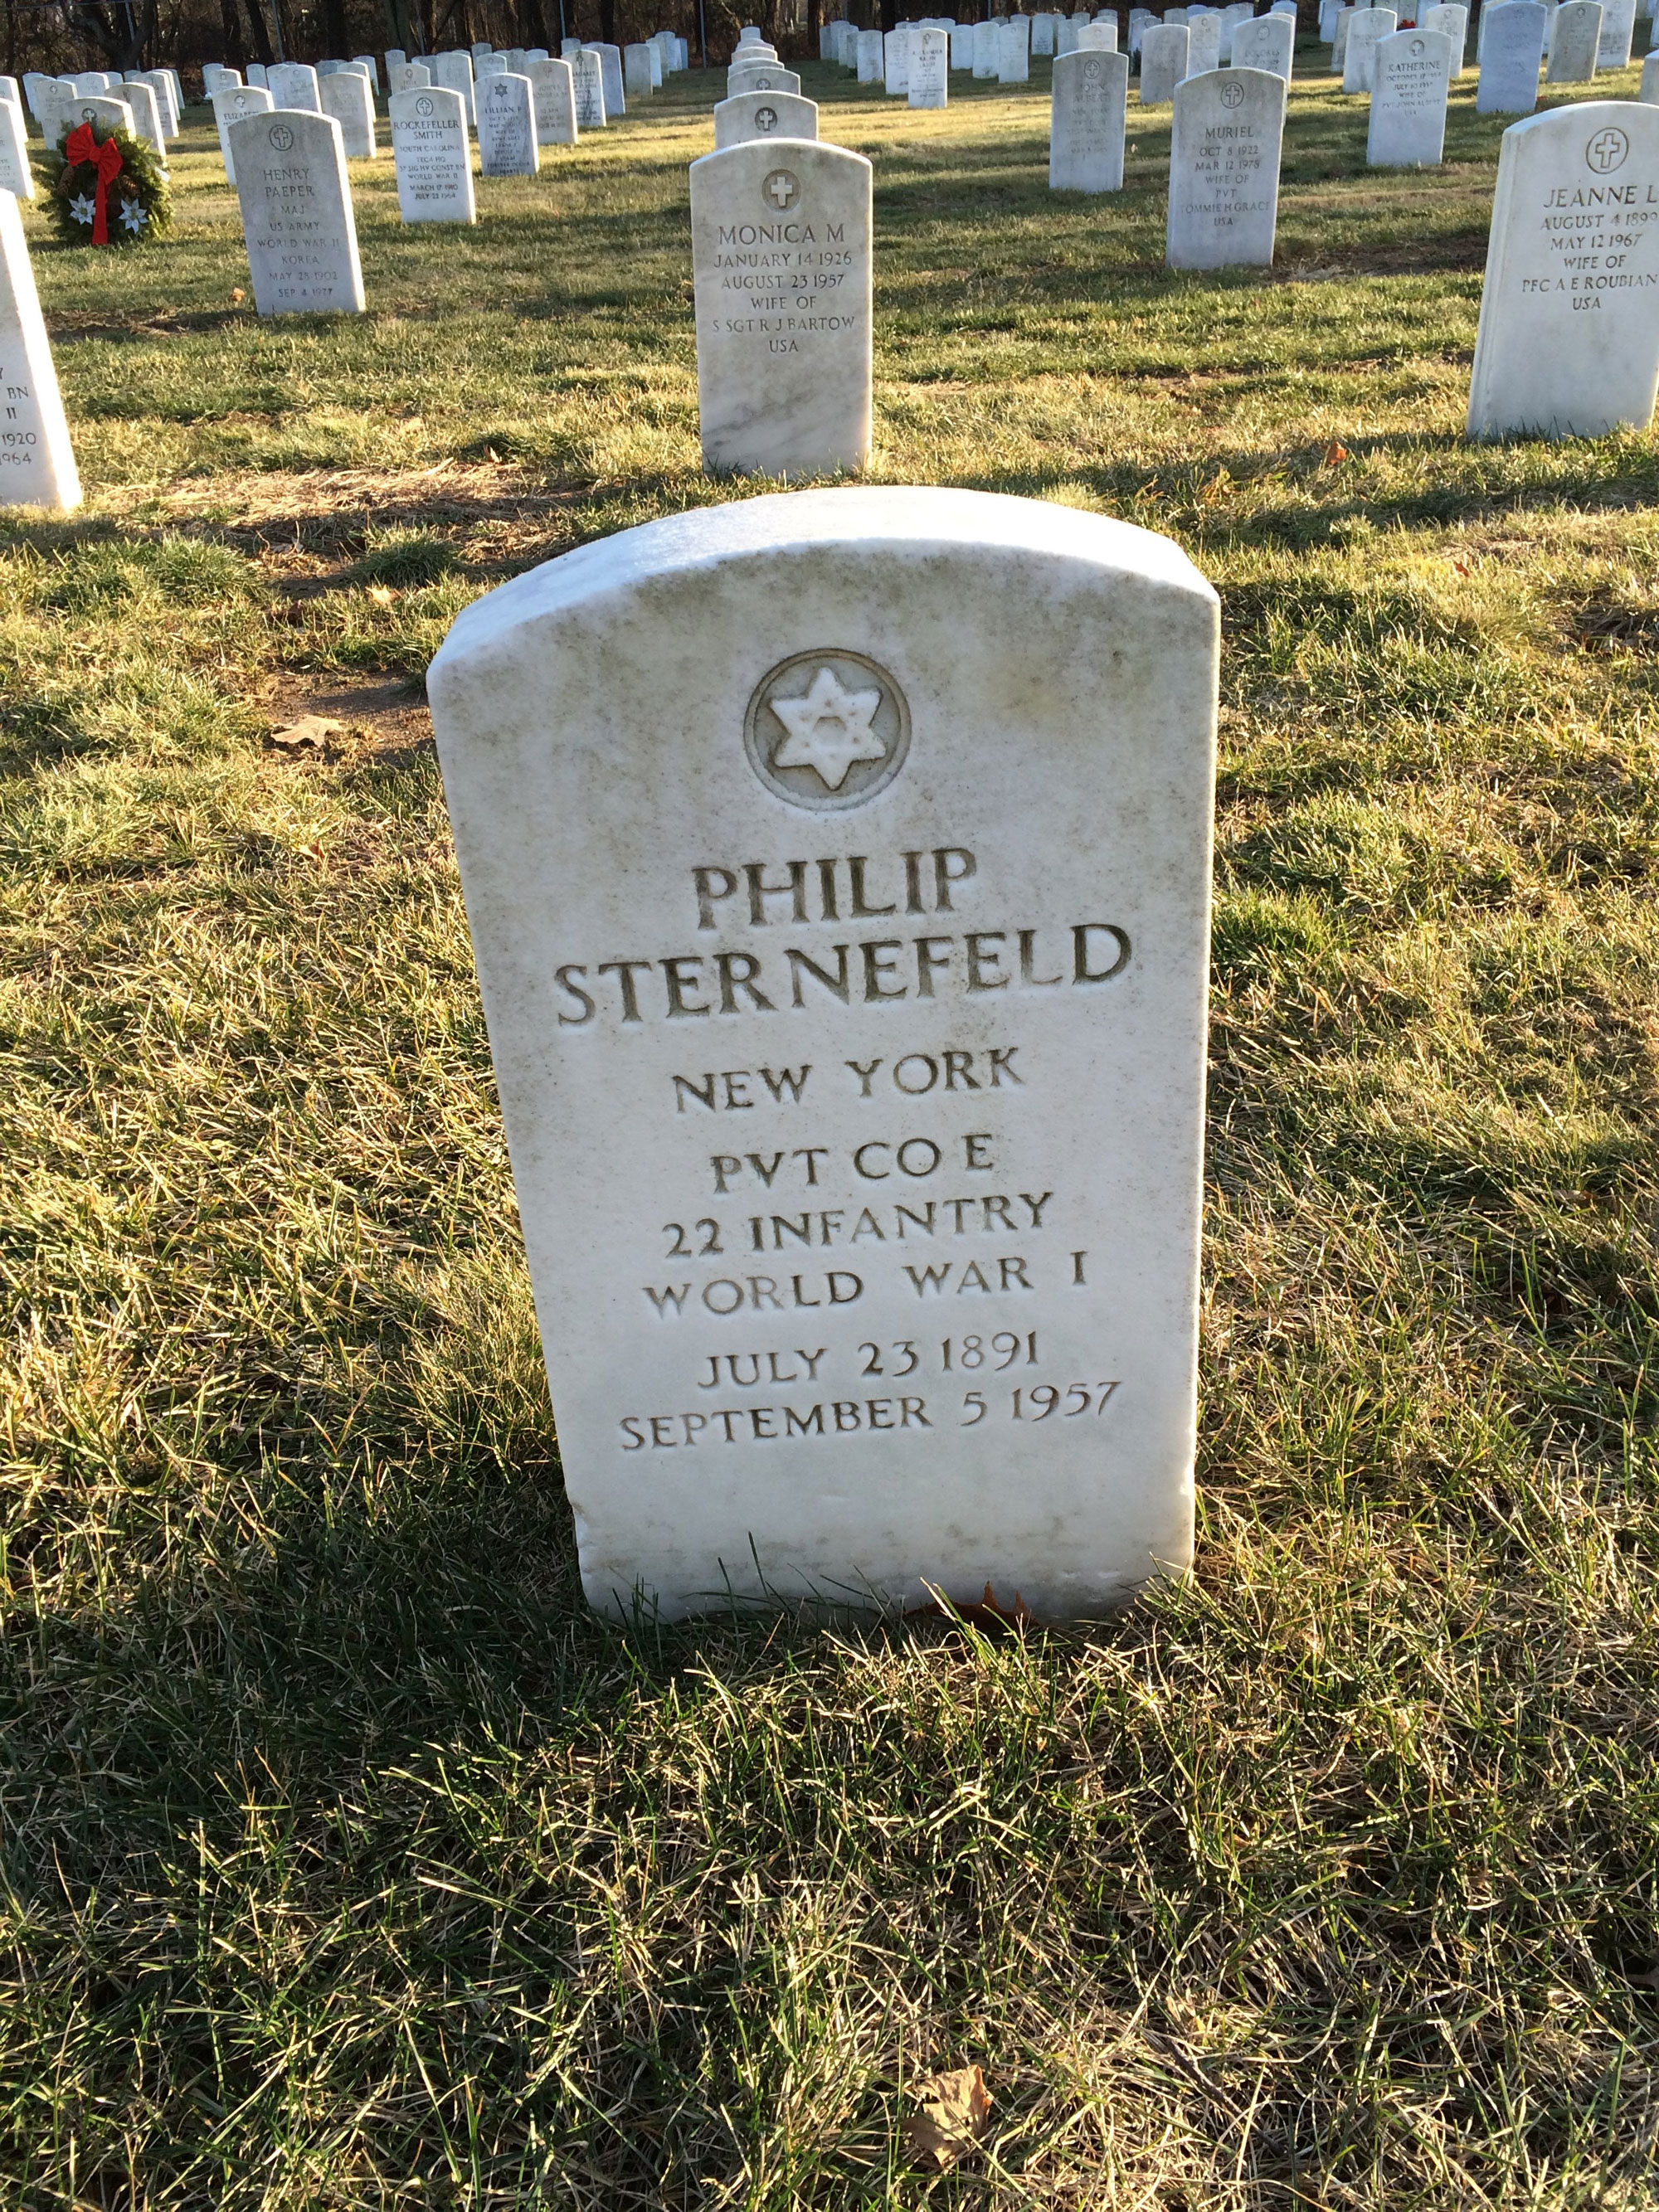 Photo credit to xchief at FindAGrave